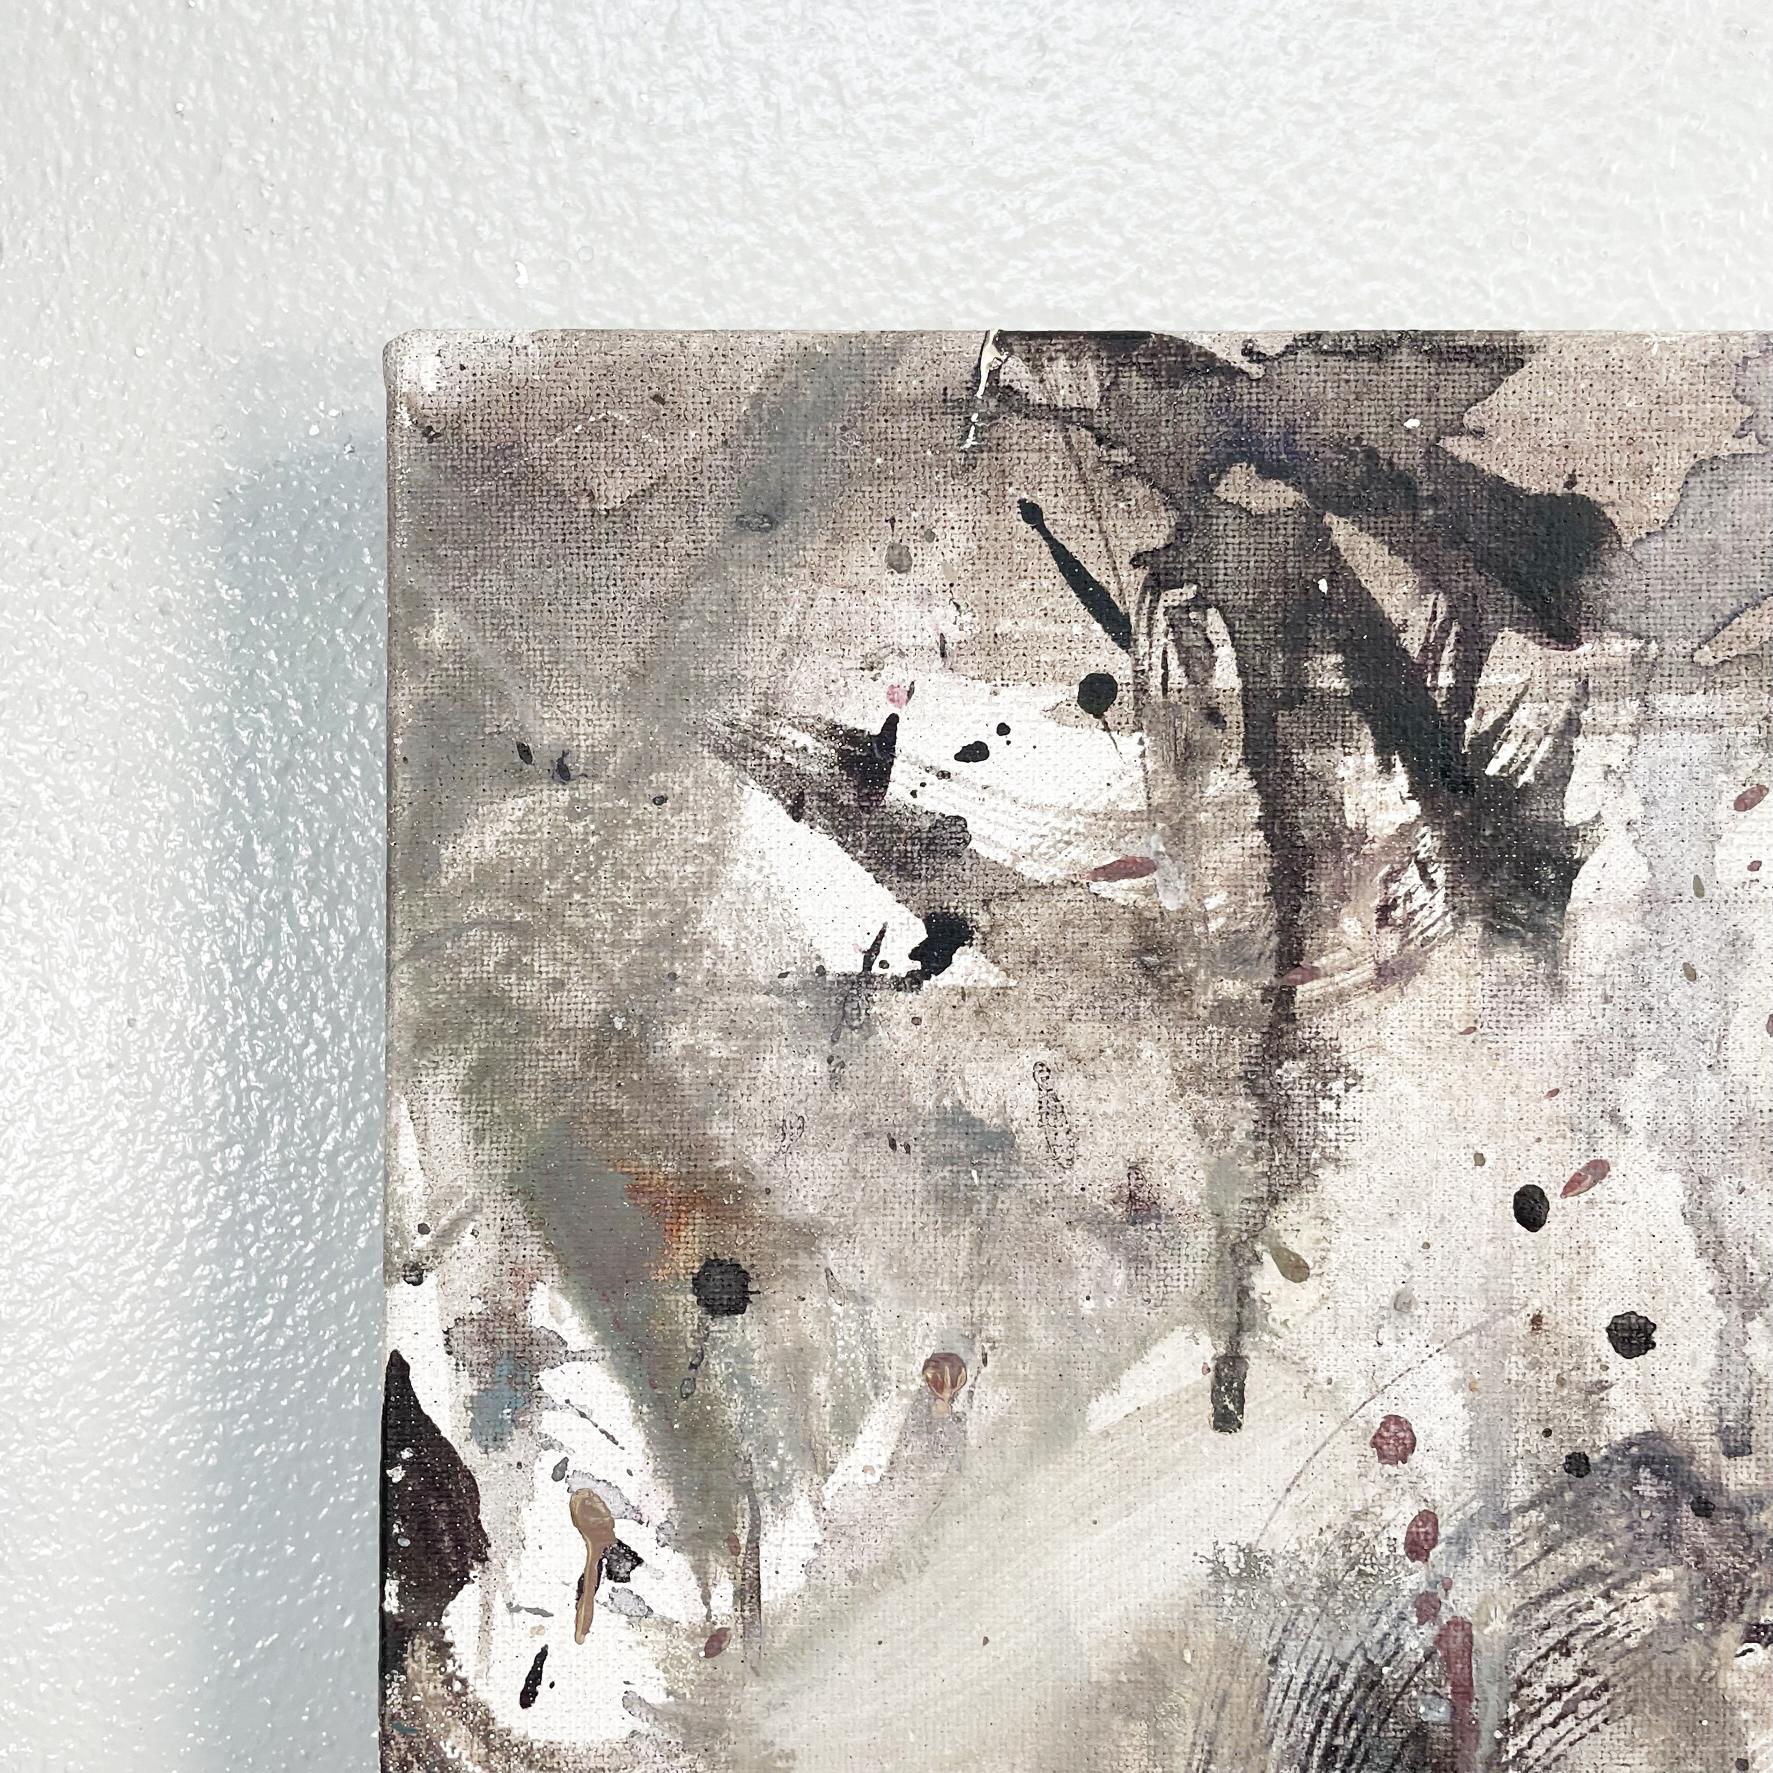 Japan Abstract paintings Mixed media by S. Junichi, 2000s
Fantastic and real decorative mixed media abstract painting on white canvas. 
This incredible painting is perfect in a modern ambient (living or bedroom) and can crate perfect corner.
The